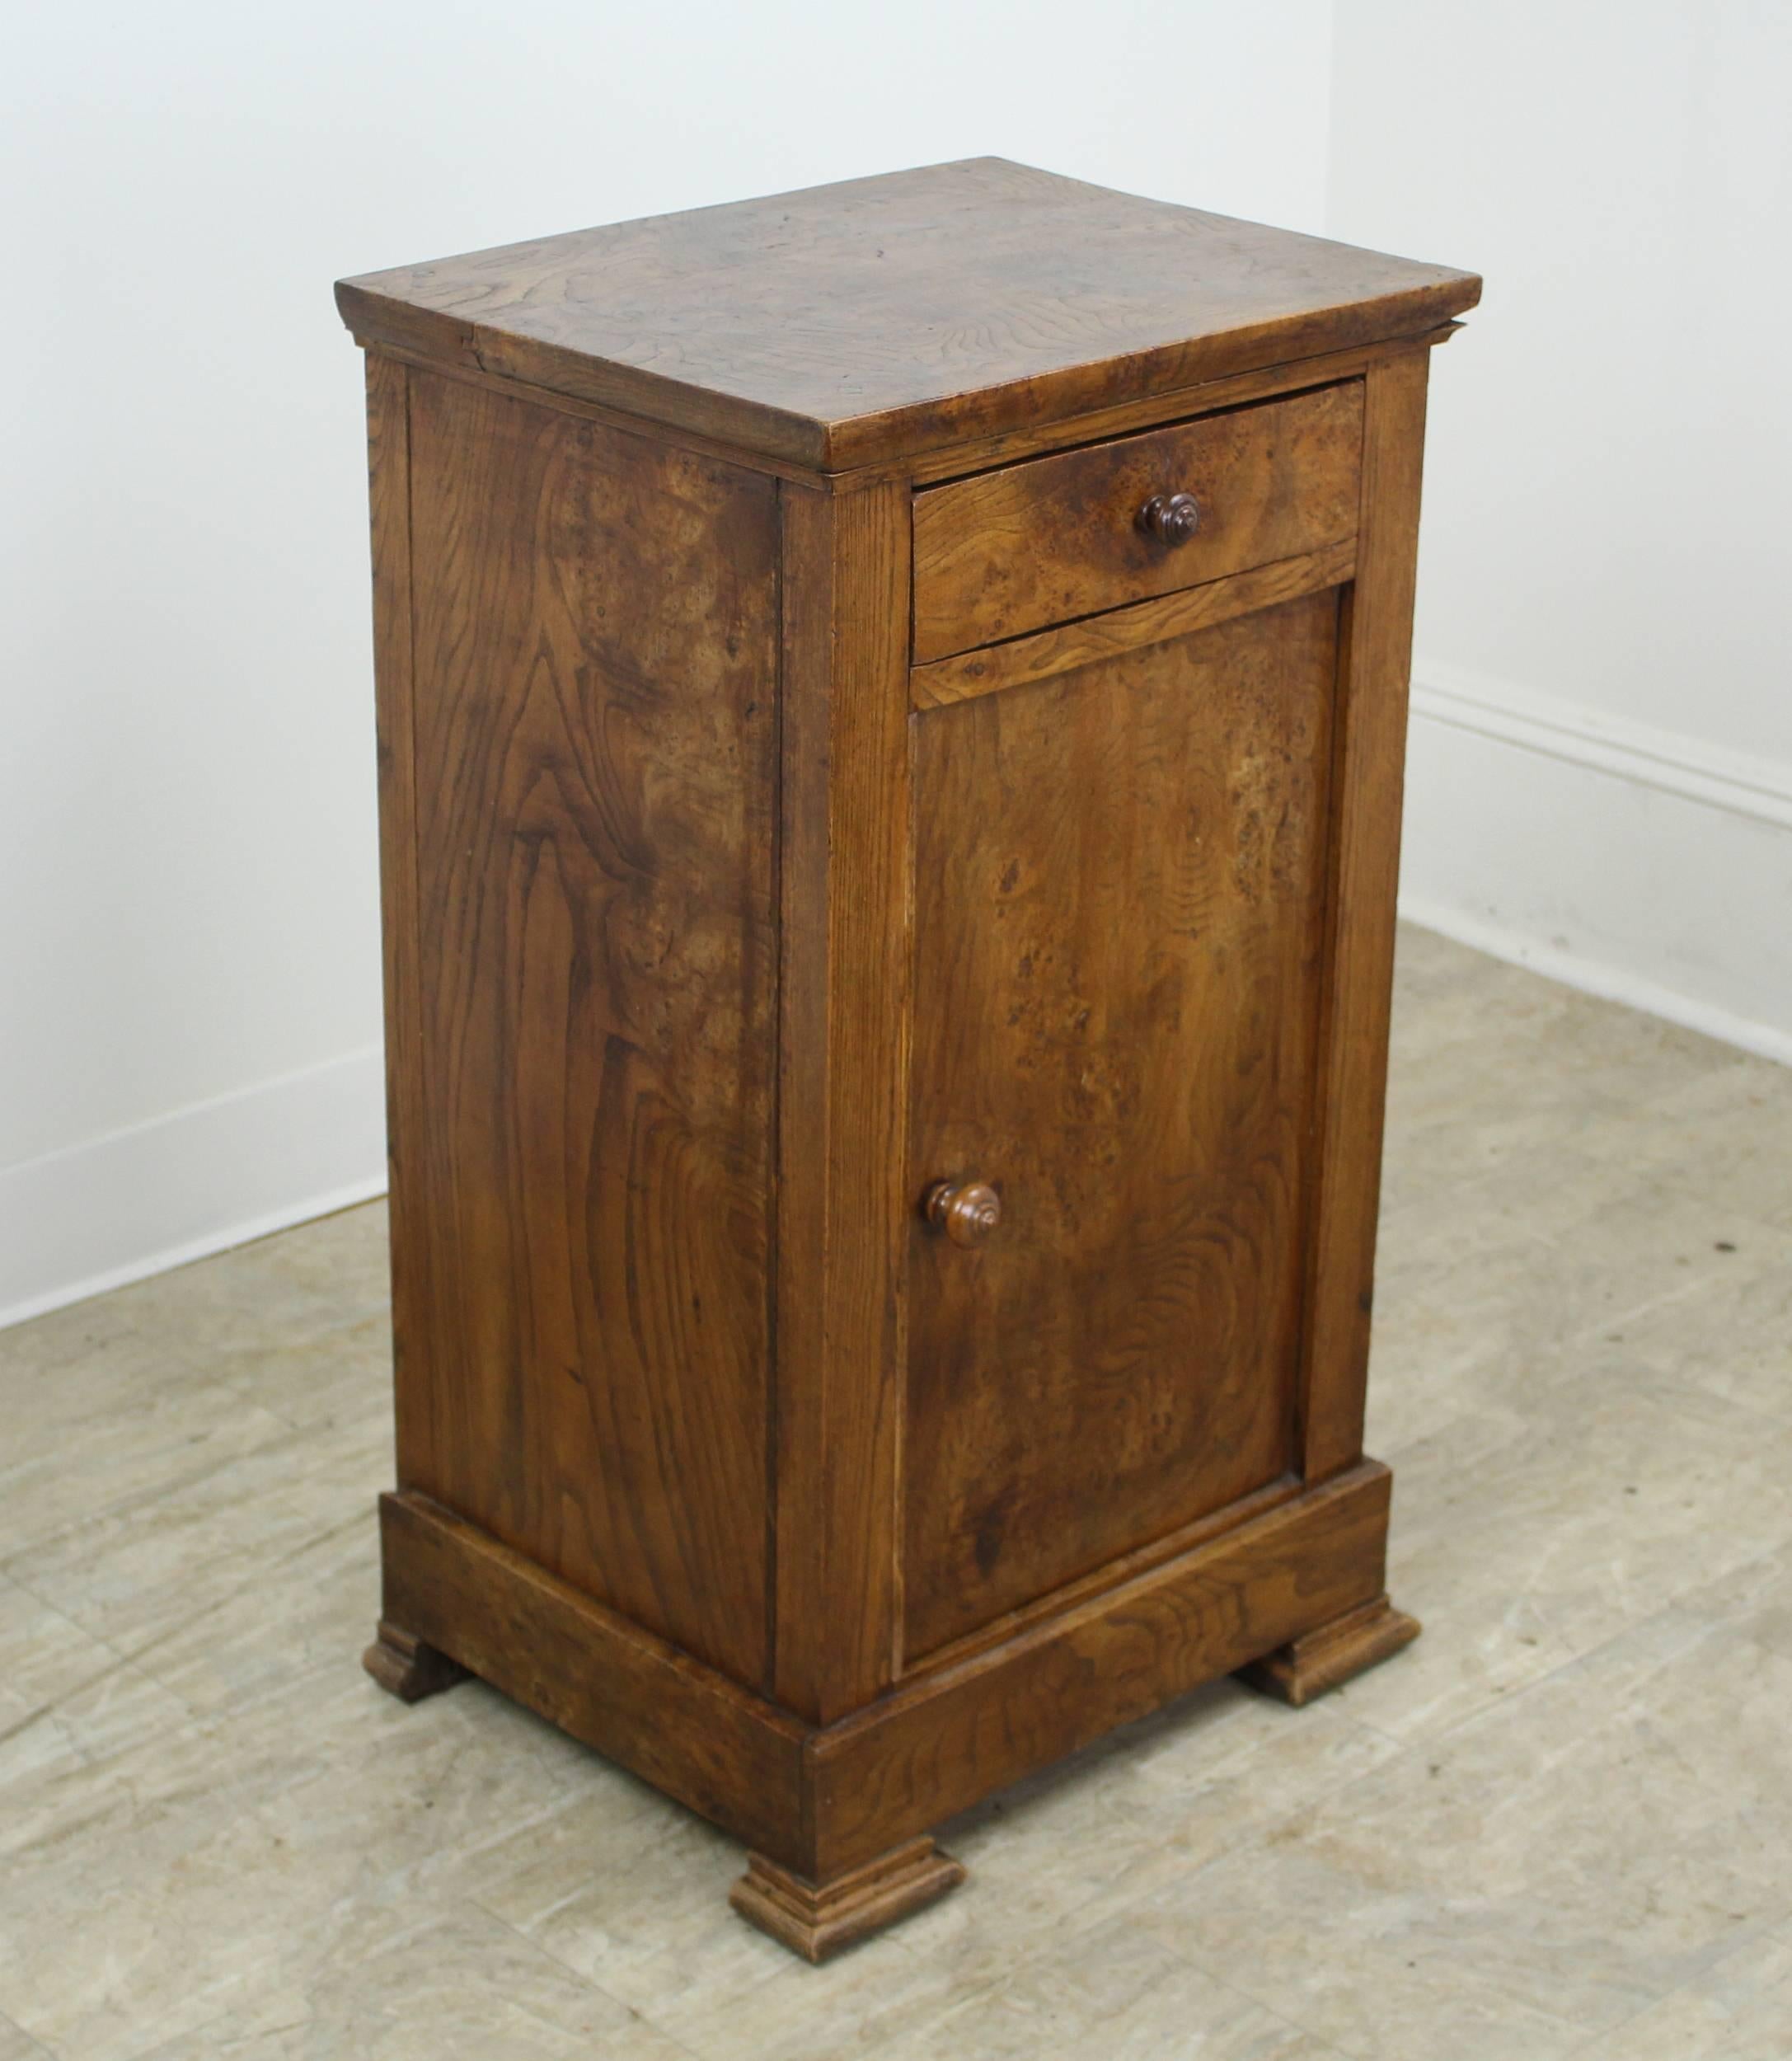 Terrific graining on this burr elm side cabinet, with a nice thick top. Sweet little drawer, and a hand-turned small knob. Lovely classic Louis Philippe feet. Great storage for a practical and handsome nightstand. Correct height for a lamp.